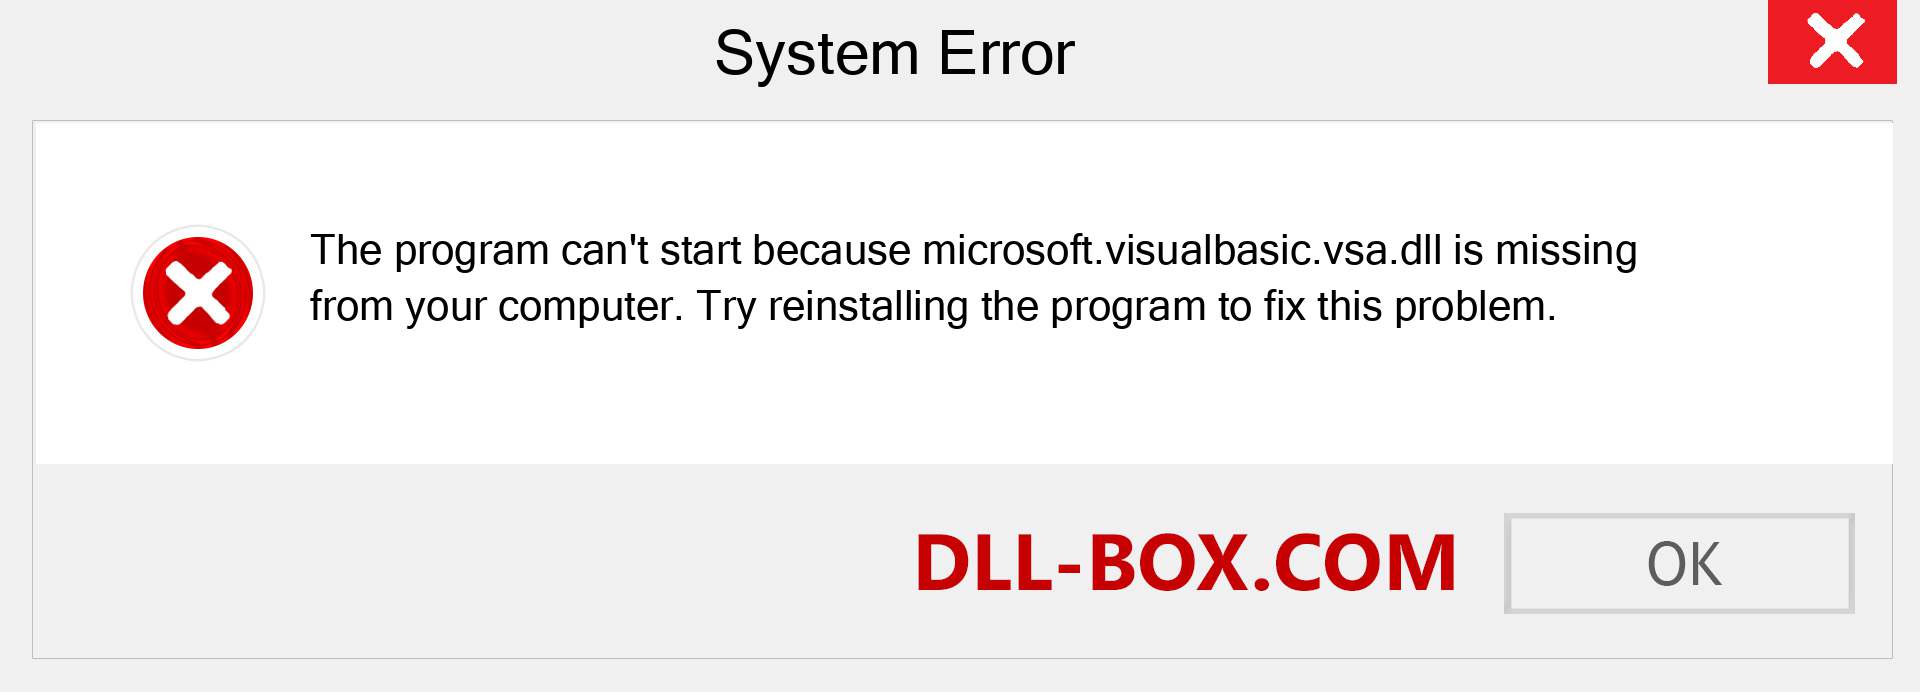  microsoft.visualbasic.vsa.dll file is missing?. Download for Windows 7, 8, 10 - Fix  microsoft.visualbasic.vsa dll Missing Error on Windows, photos, images